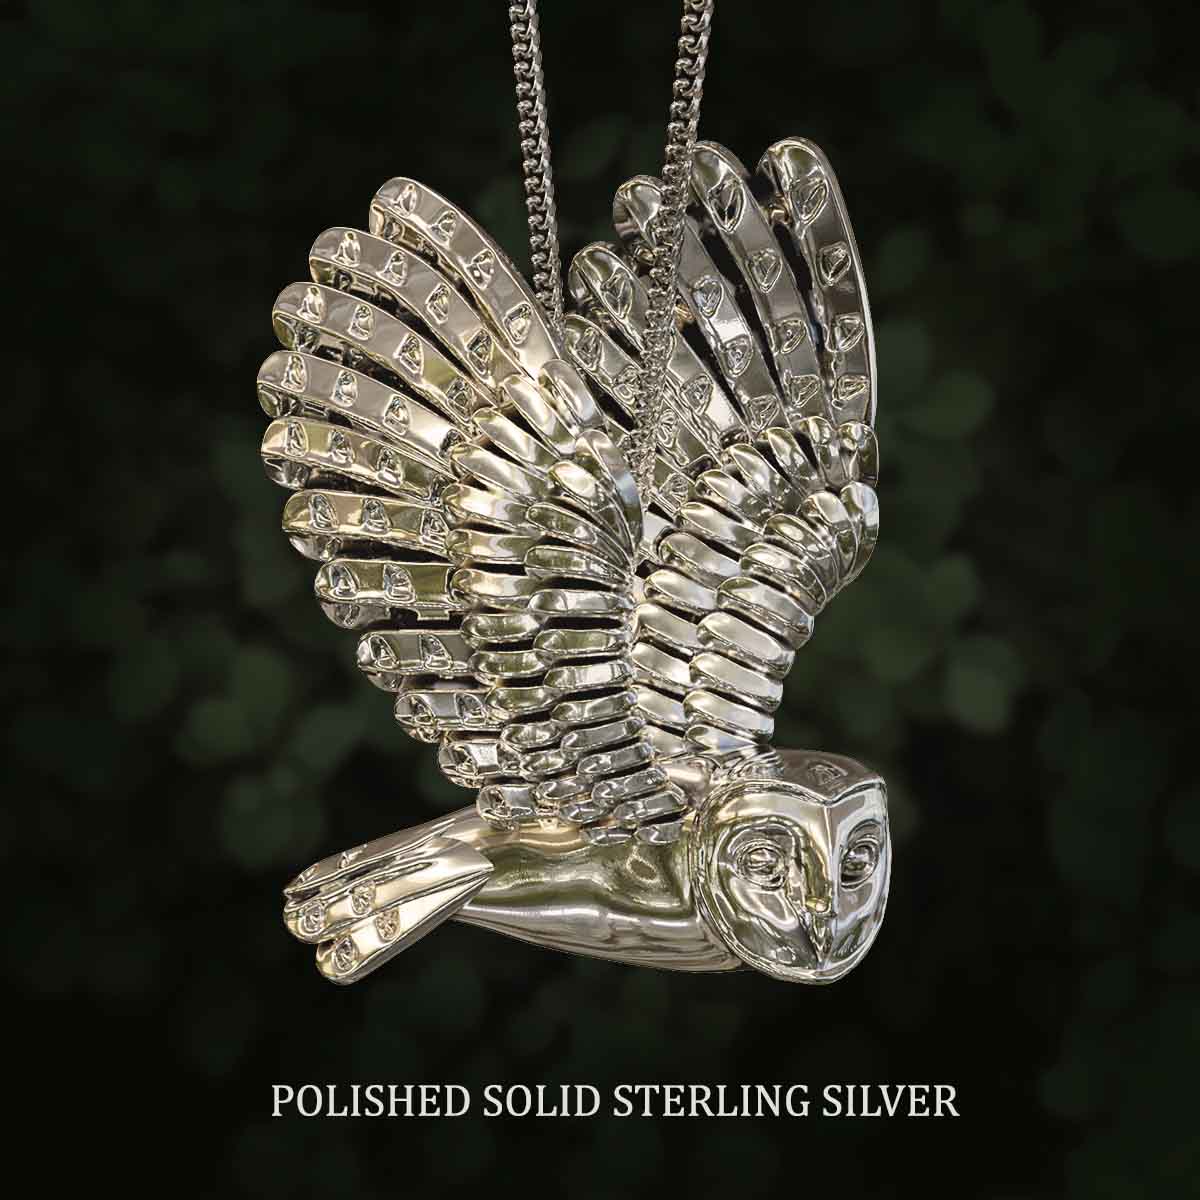     Polished-Solid-Sterling-Silver-Owl-Wings-Up-Pendant-Jewelry-For-Necklace